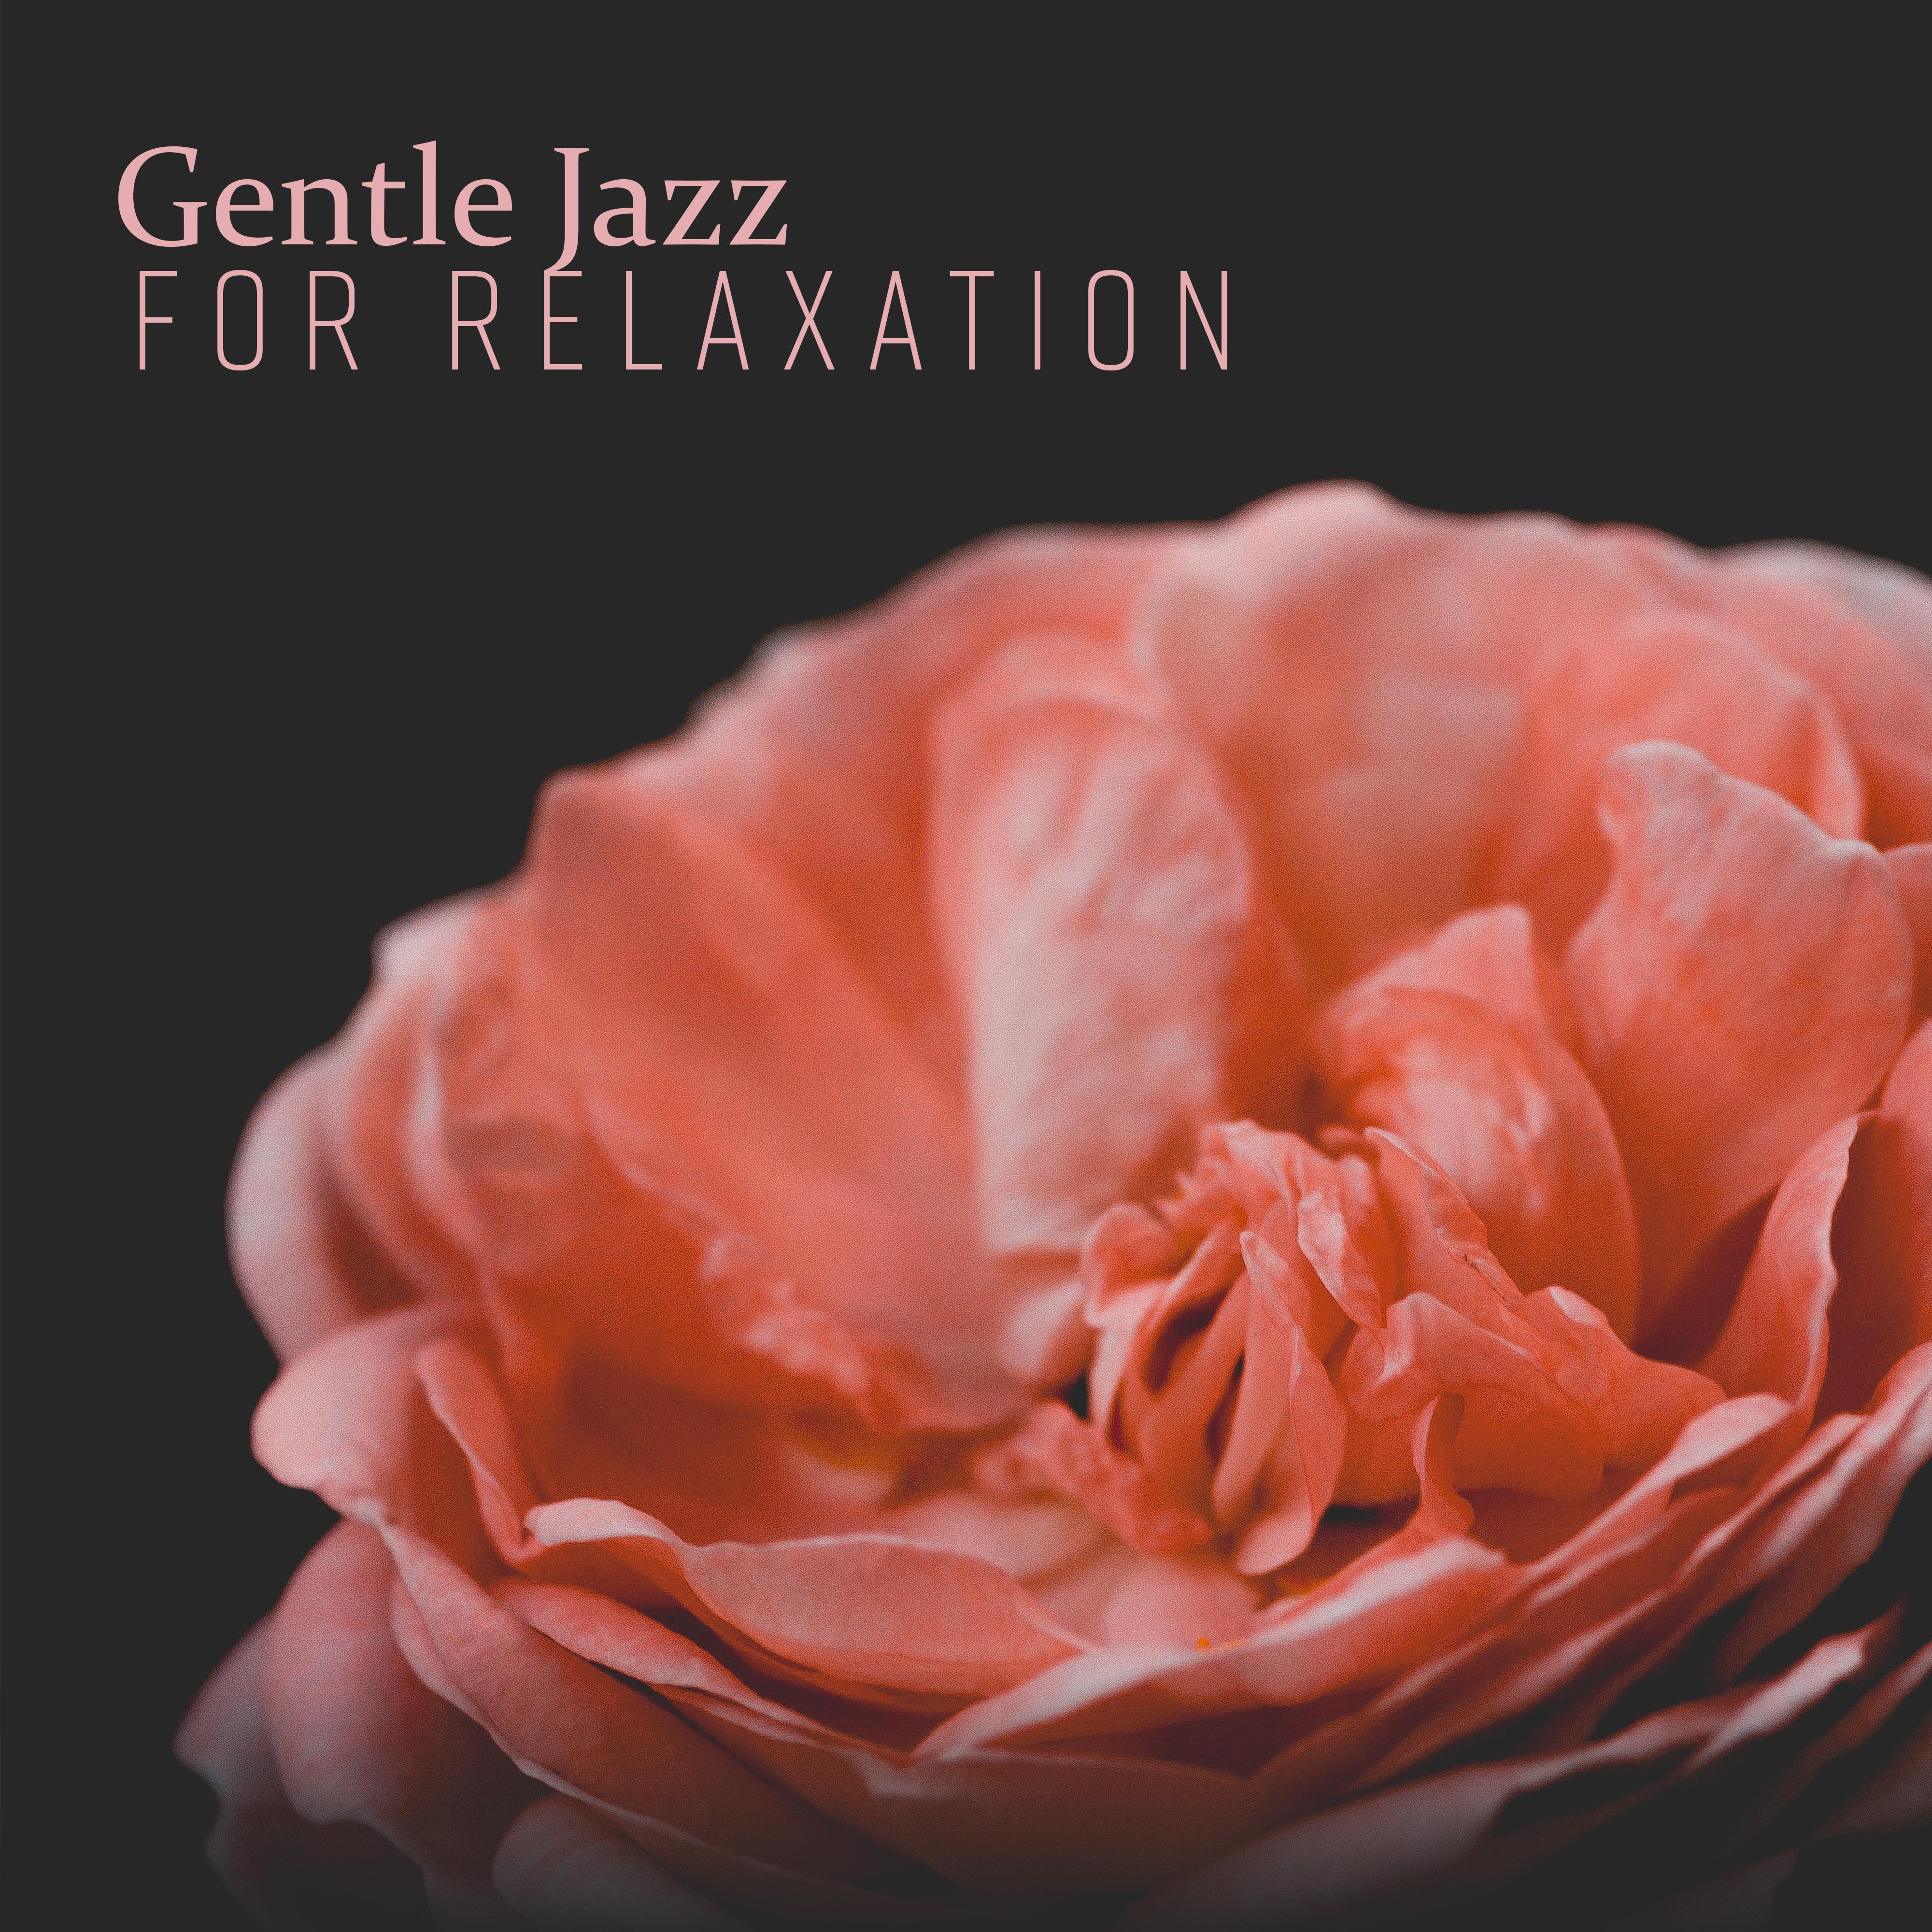 Gentle Jazz for Relaxation